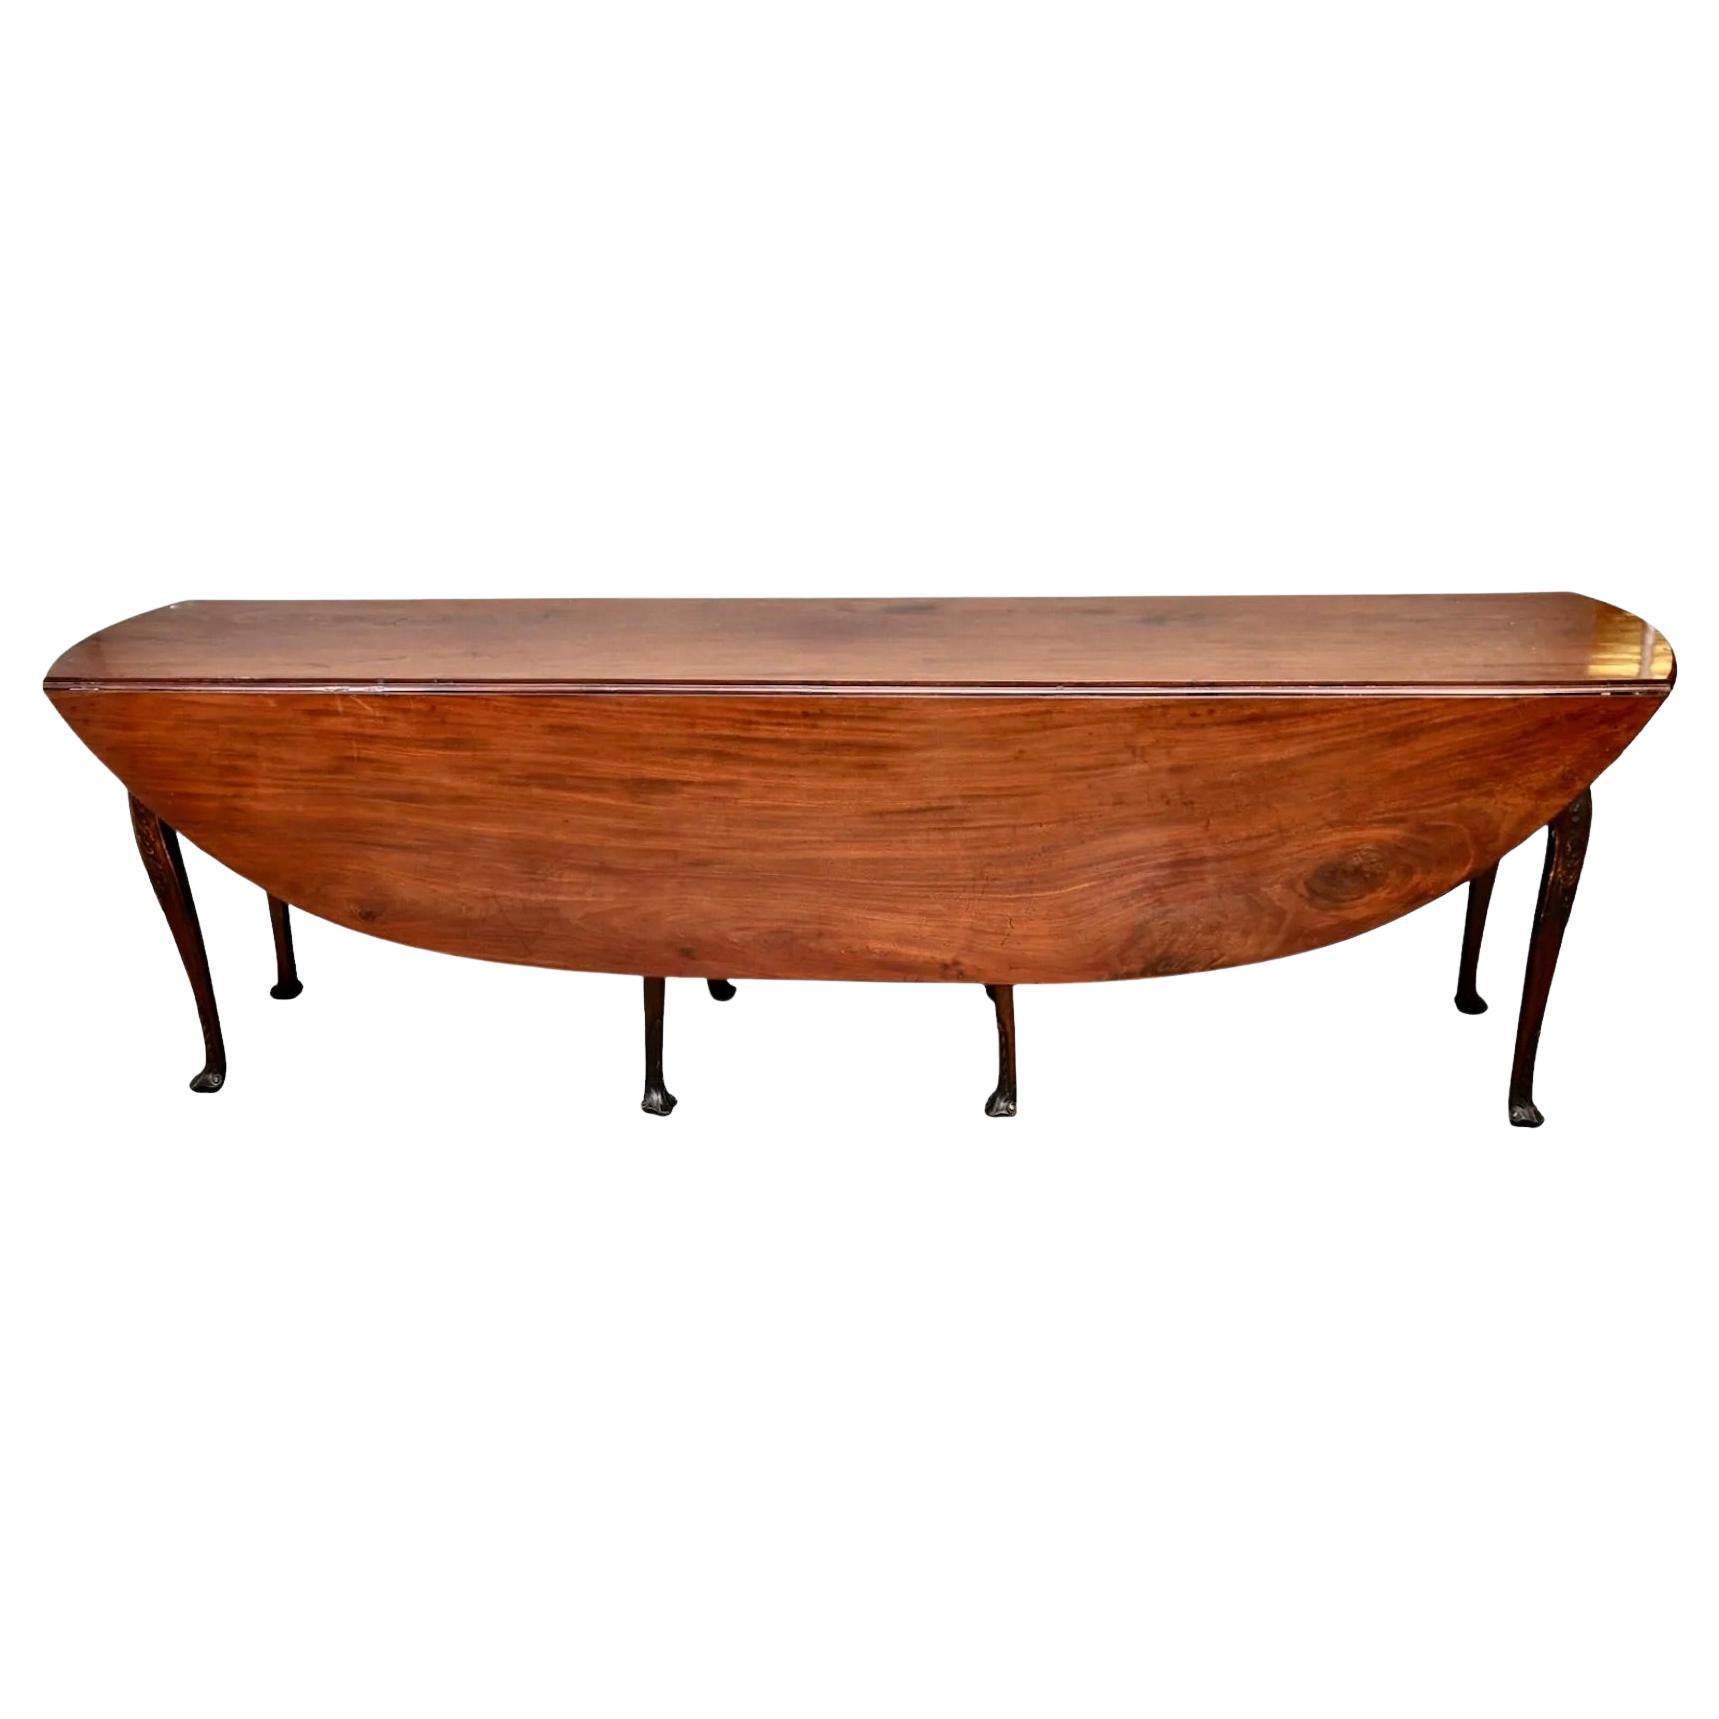 18th Century Irish Mahogany Wake or Dropleaf Dining Table For Sale